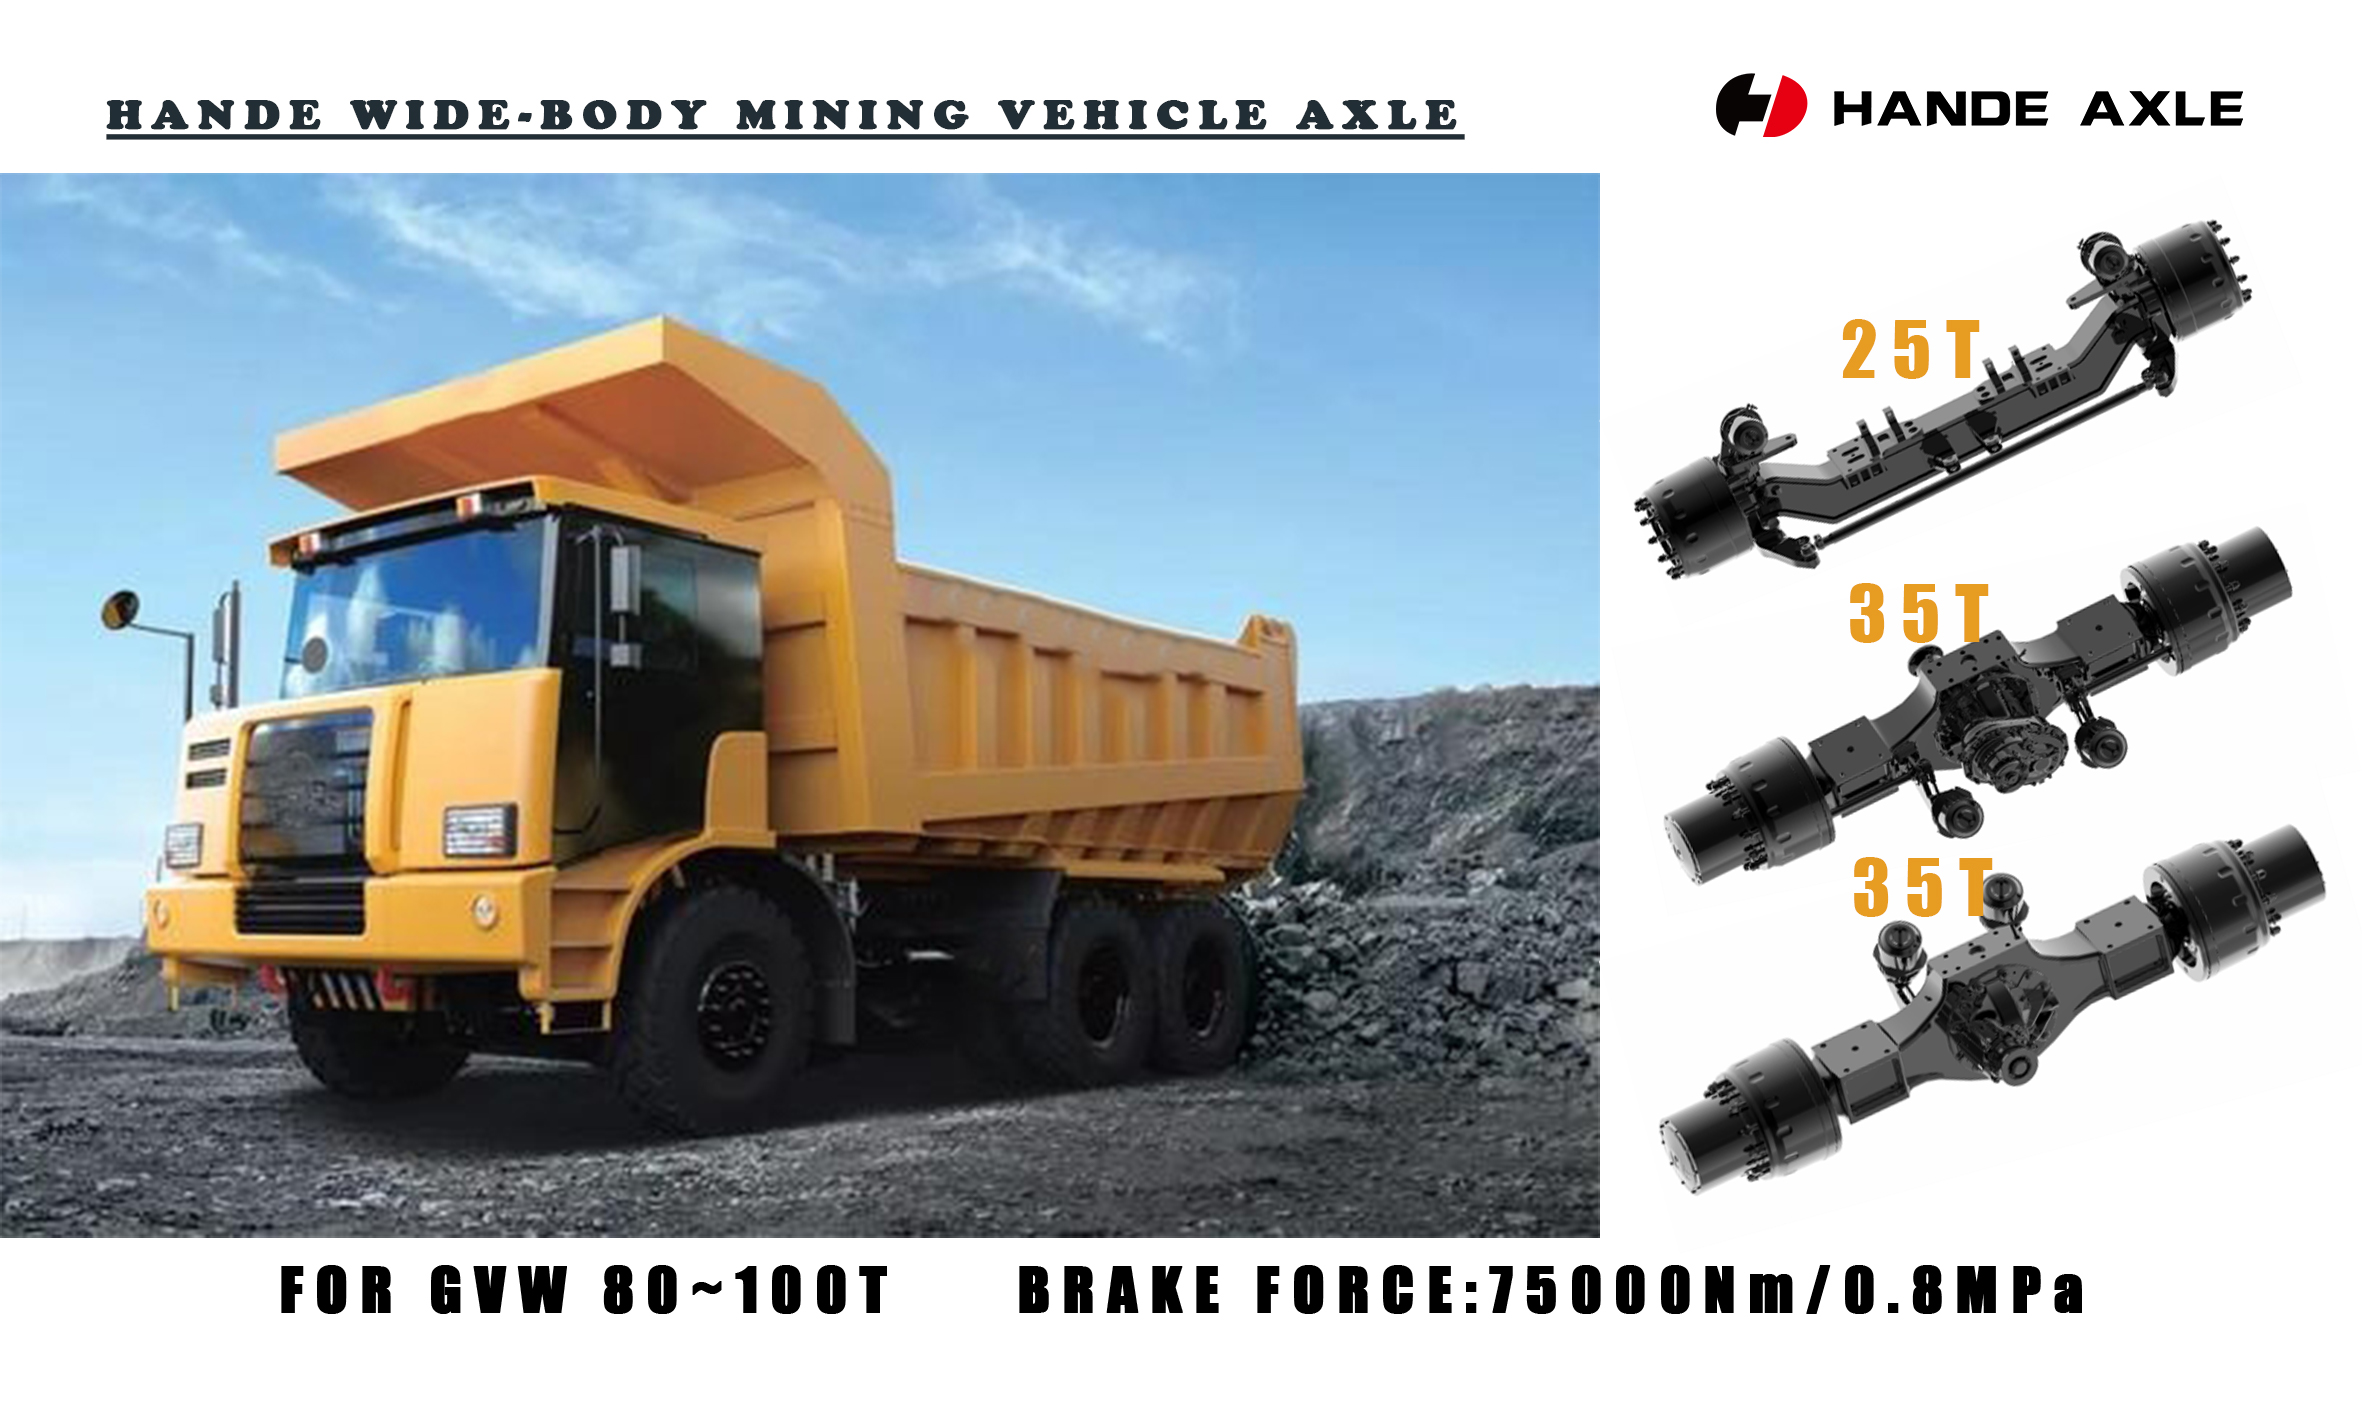 HanDe Wide-body Mining Truck Axle Supplied to India in Batch